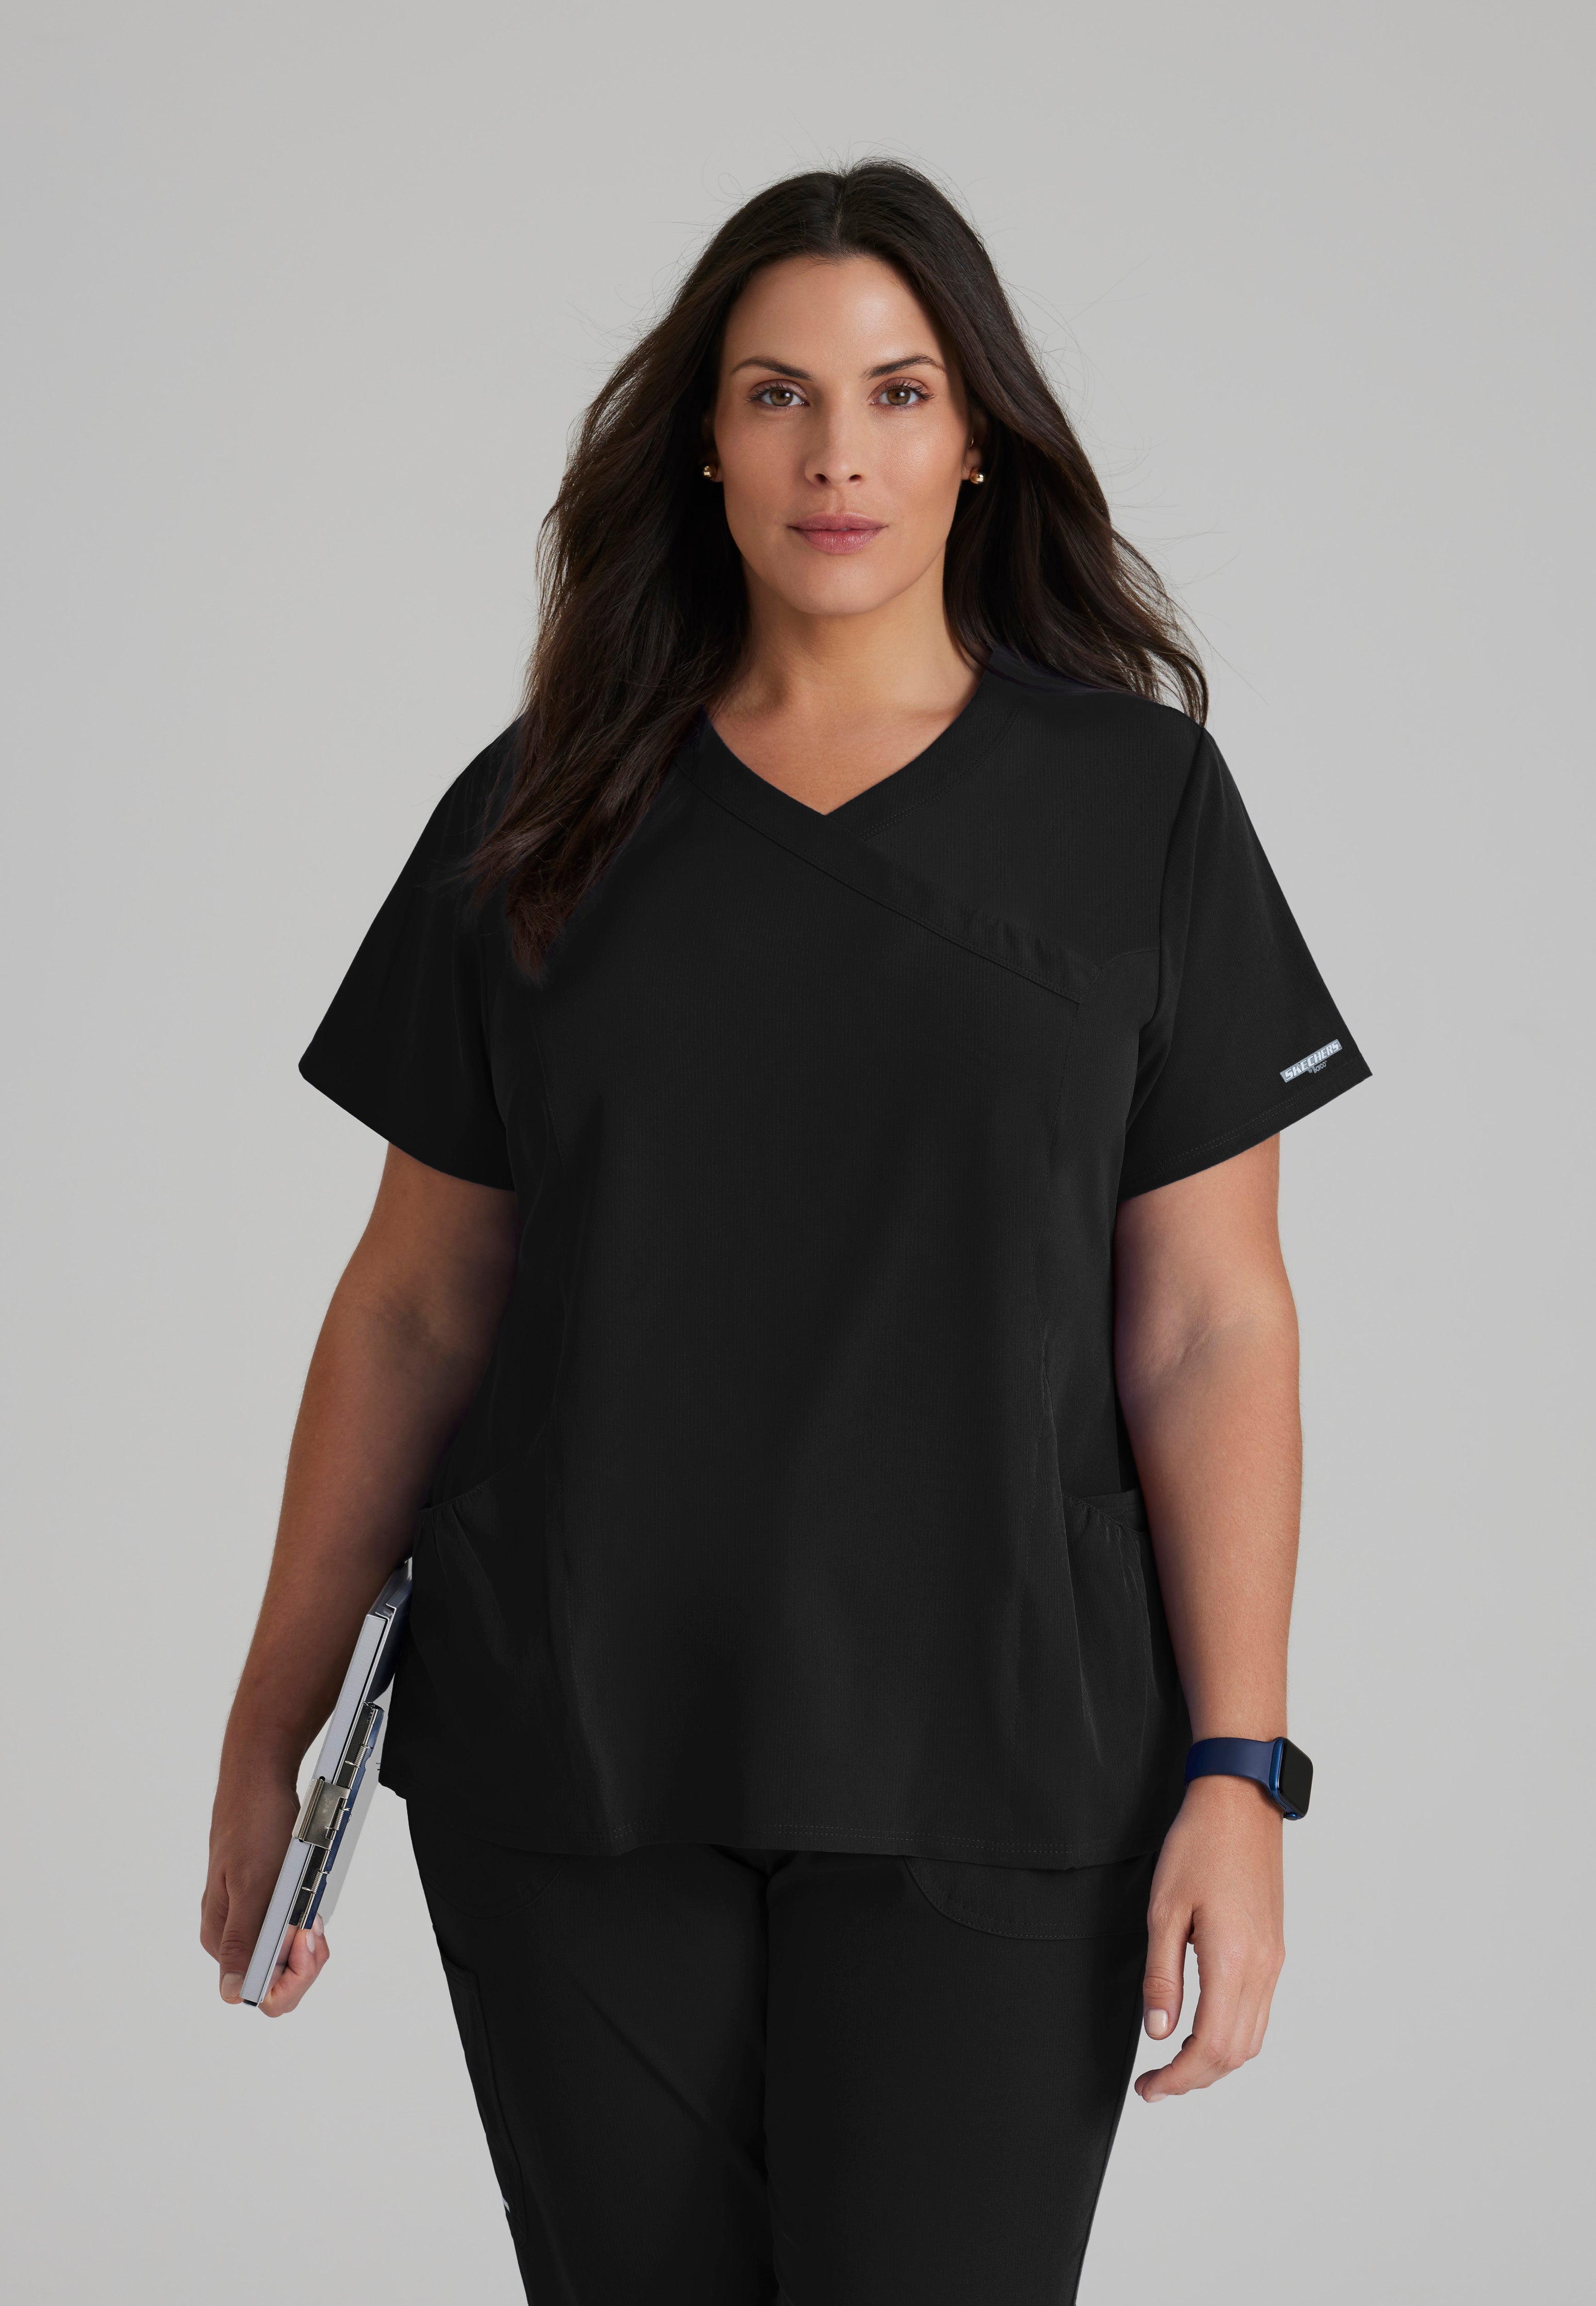 Barco Uniforms: Skechers by BarcoWomen's 2-Pocket Stability Snap Front  Jacket, Discount Barco Nursing Scrubs and Medical Uniforms, Discounts on  Barco Scrubs